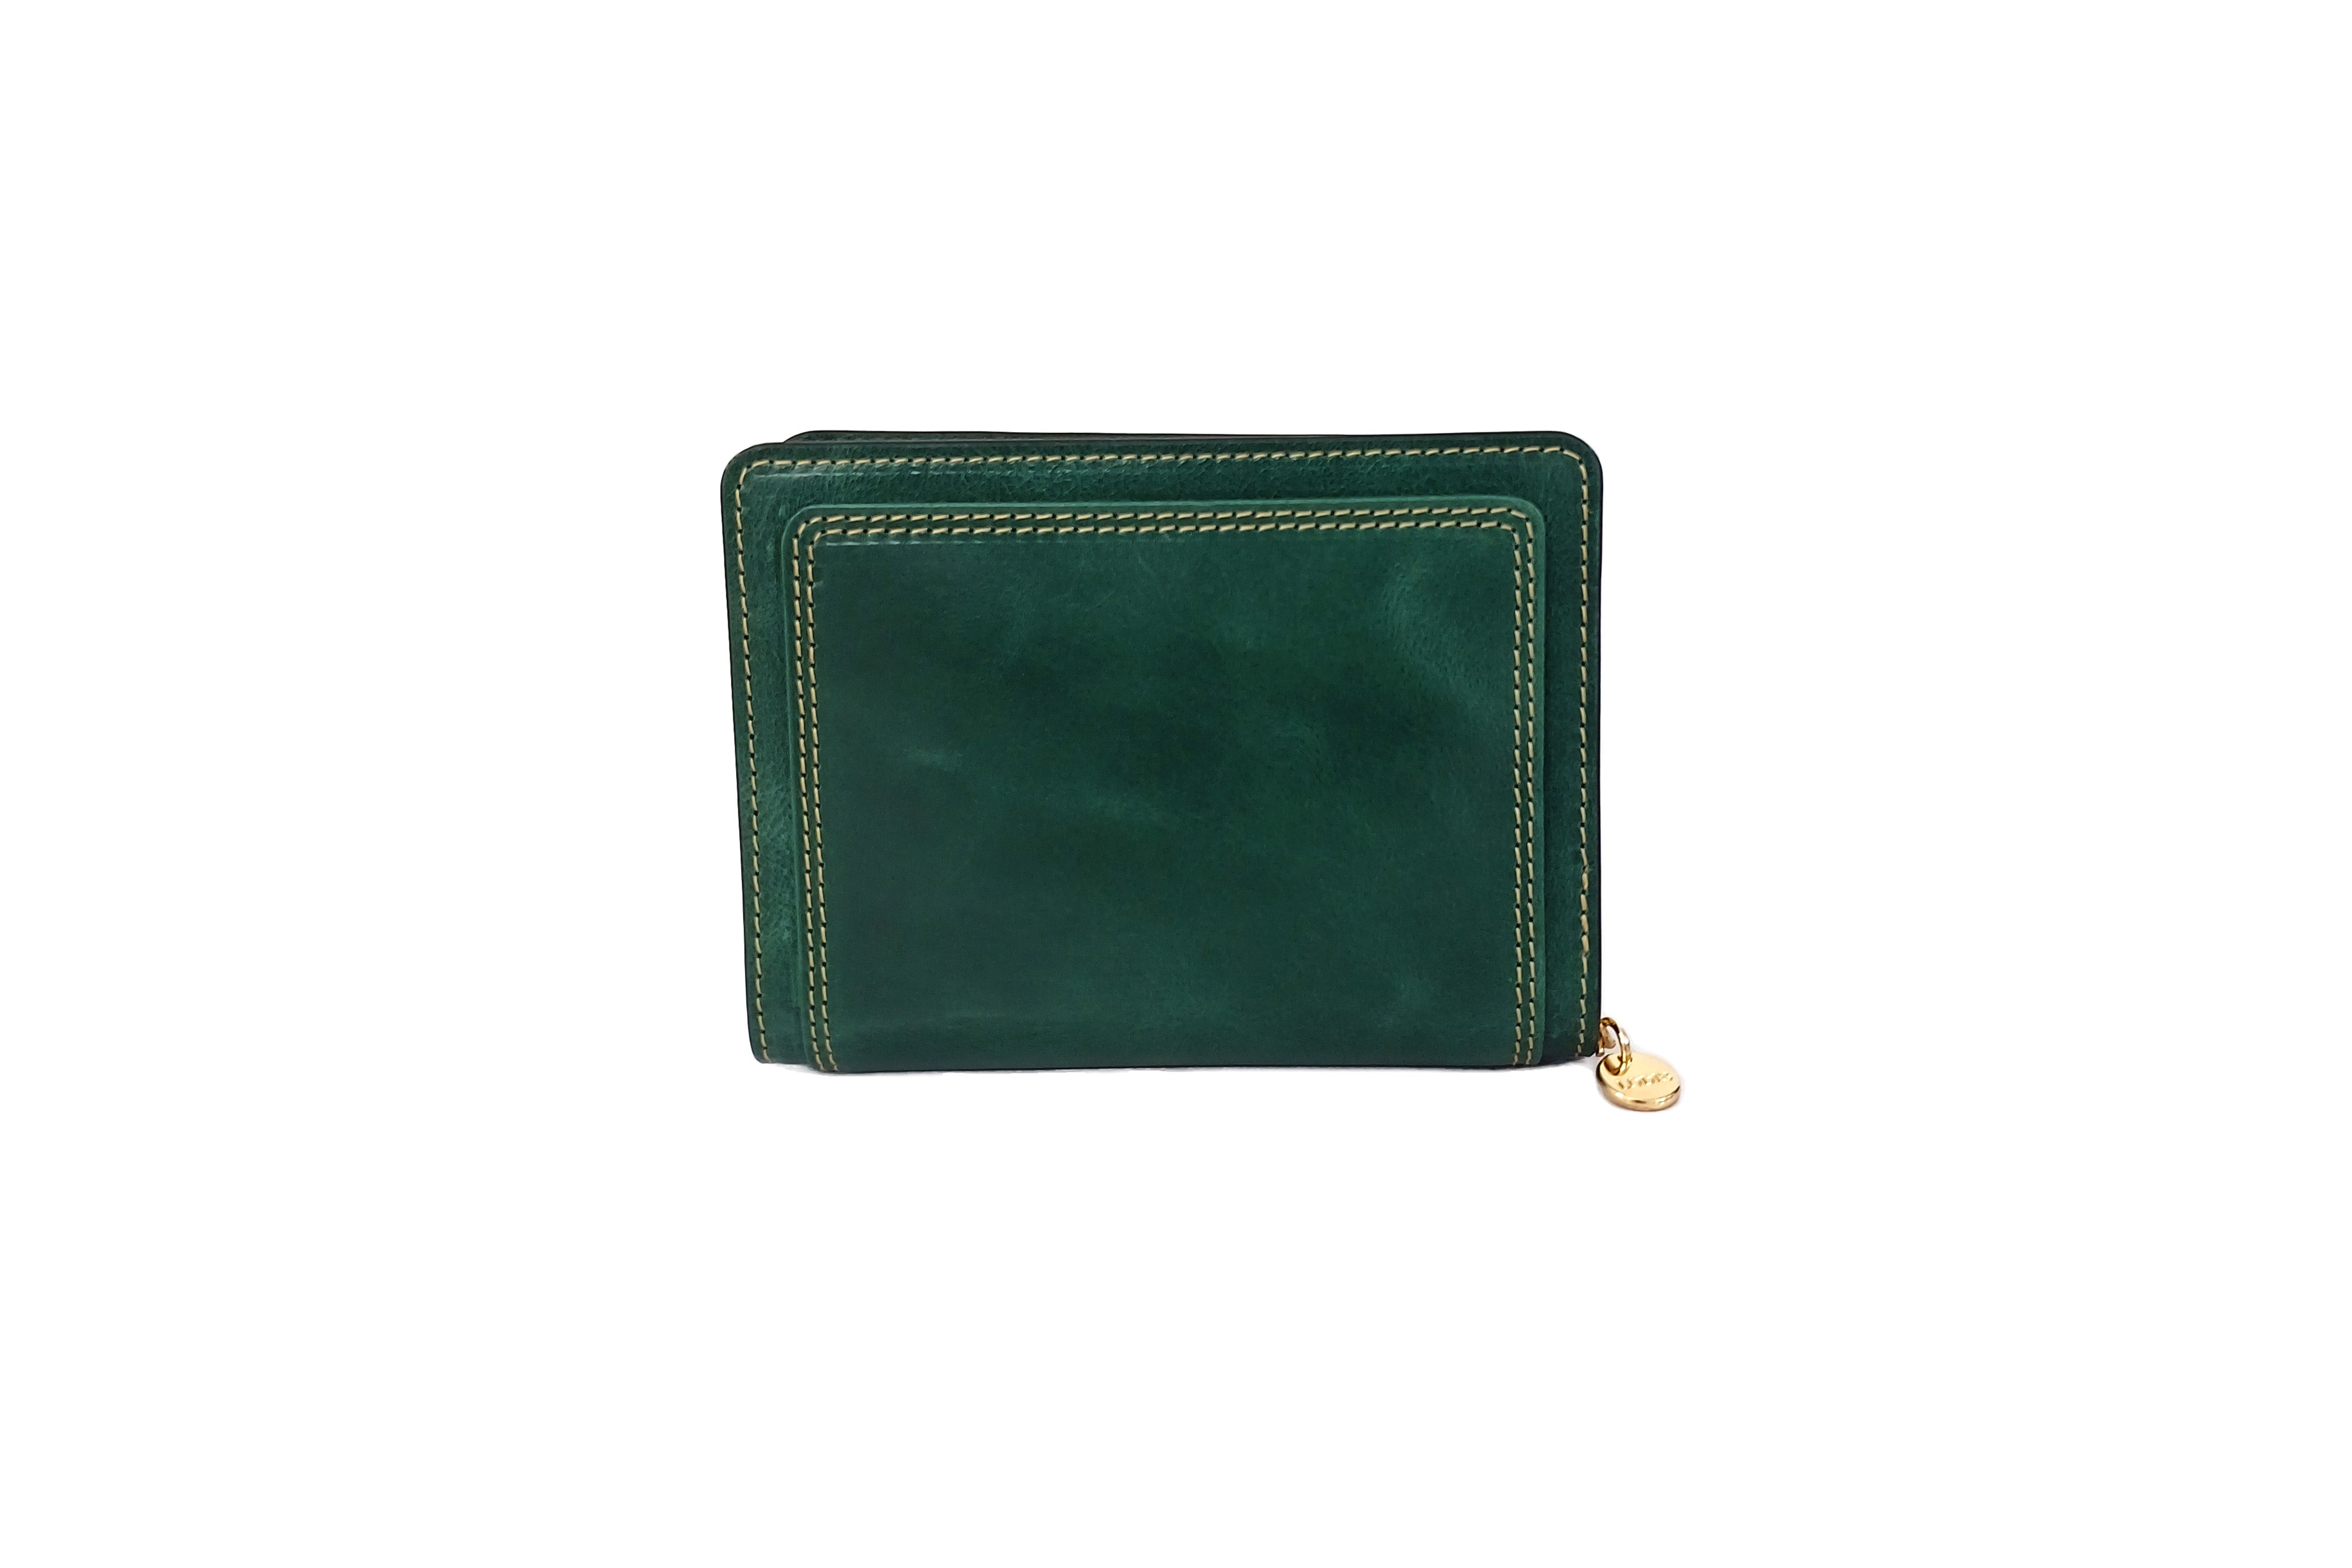 Buy Now The Donna Zip Wallet To upraise Your everyday style | Lodis